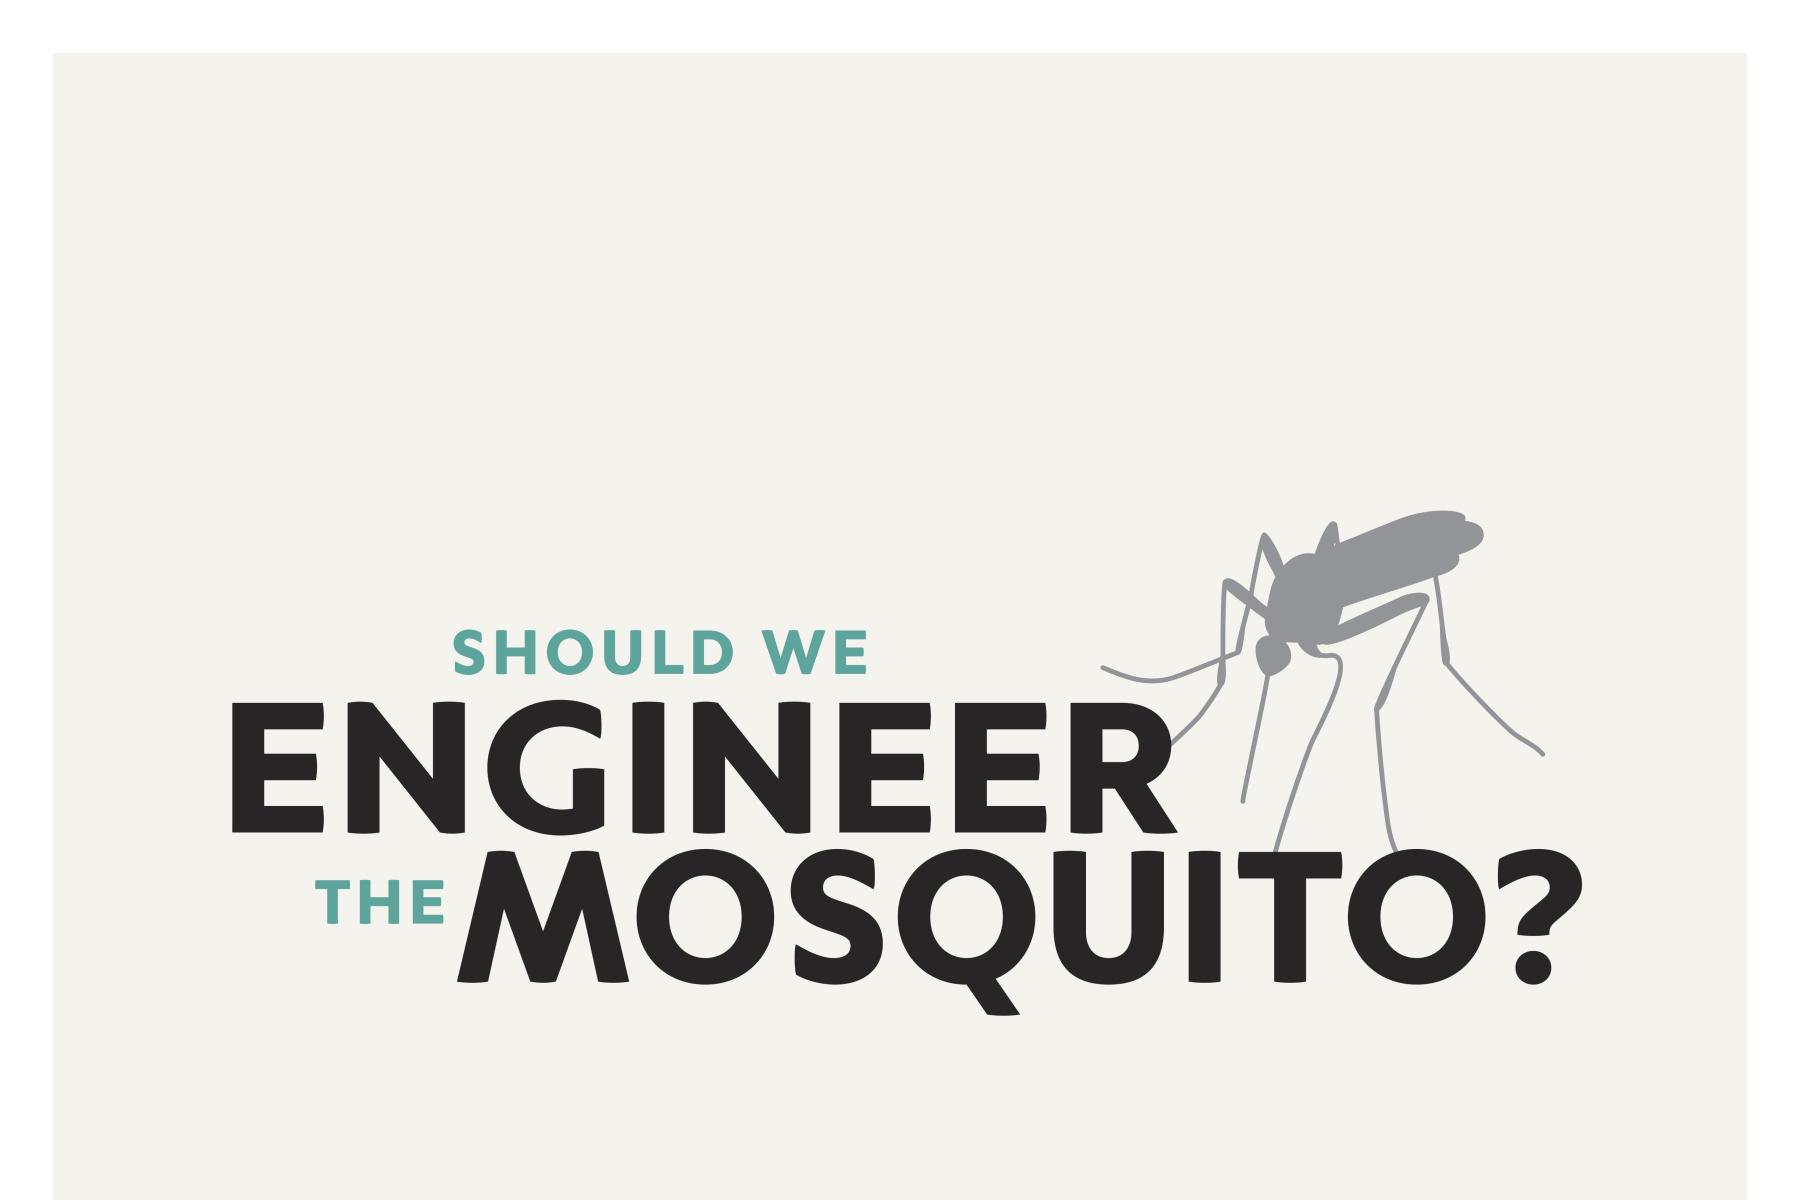 Should we engineer the mosquito promotional sign showing image of mosquito